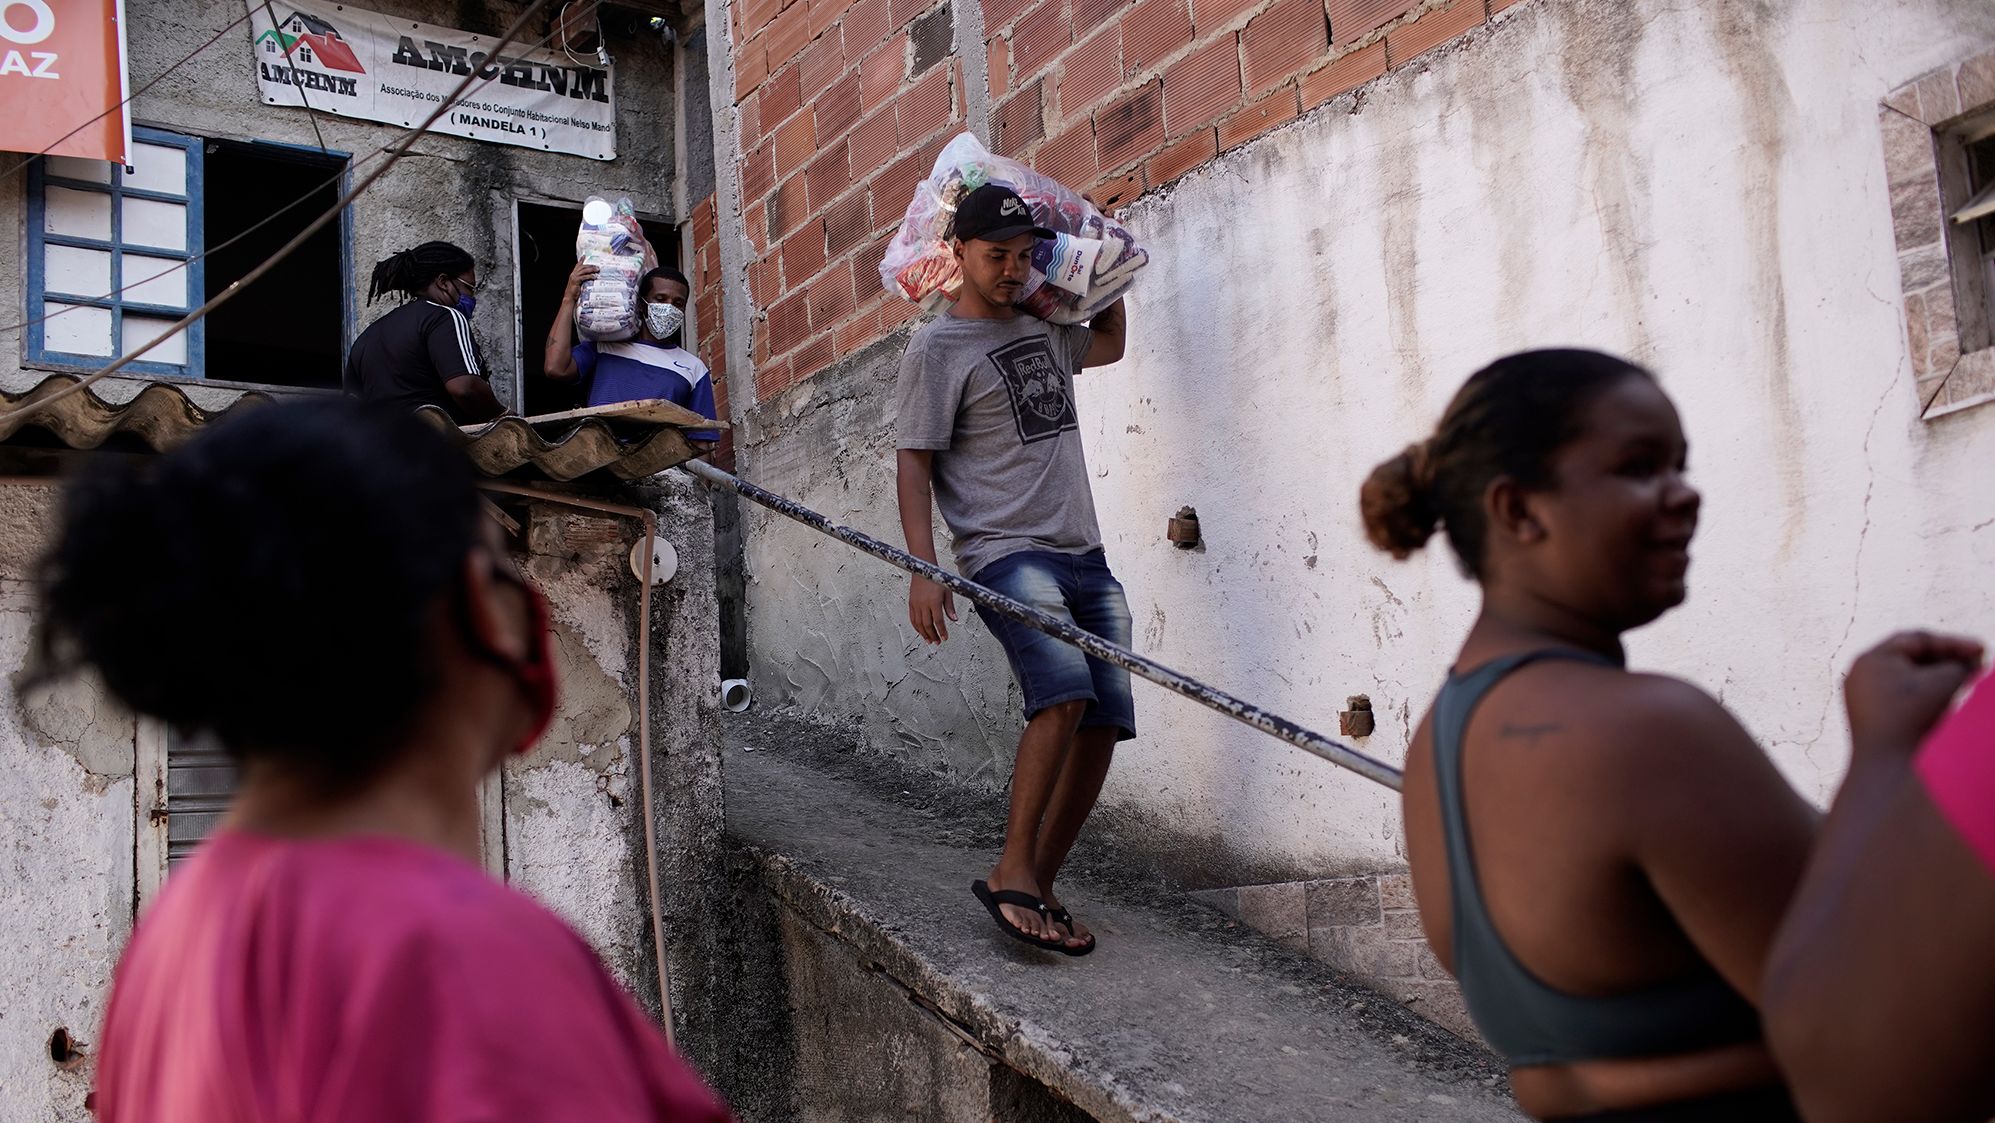 Residents carry food donated by a non-governmental agency amid the new coronavirus pandemic, in the Mandela slum, in Rio de Janeiro, Brazil, on  April 21